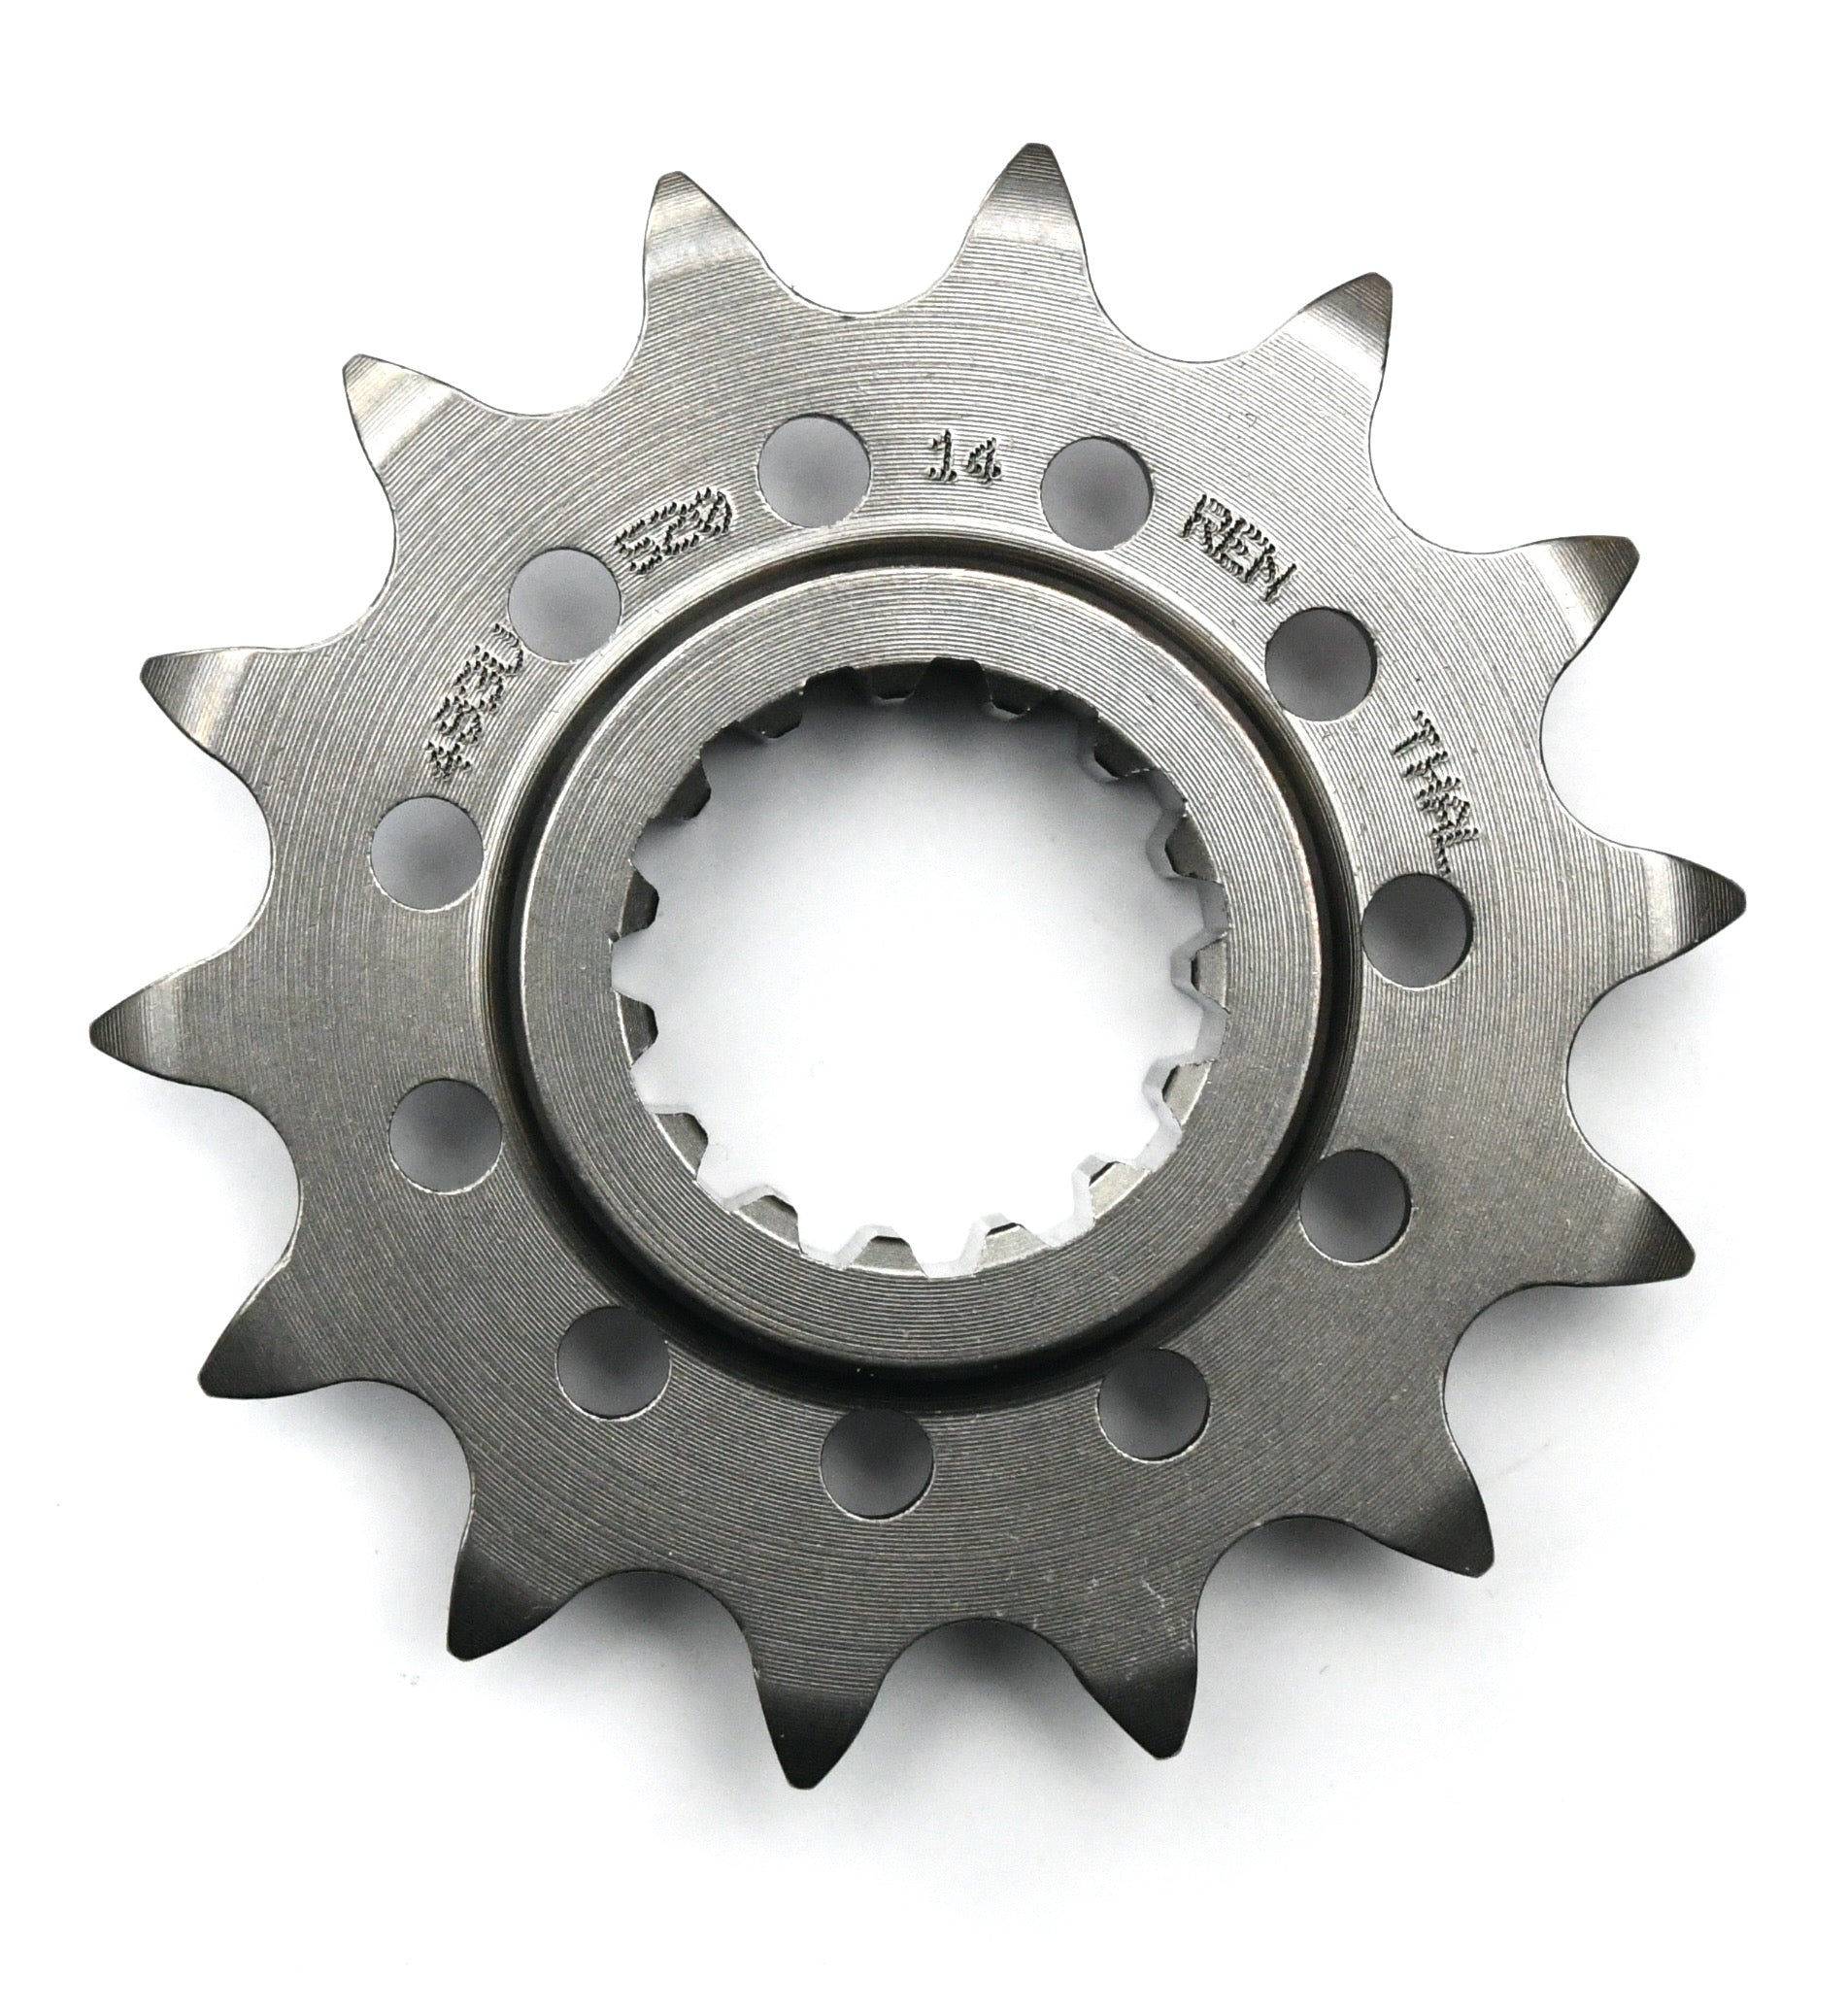 Renthal Ultralight 520 Conversion Front Sprocket 493u-520 - Choose Your Gearing